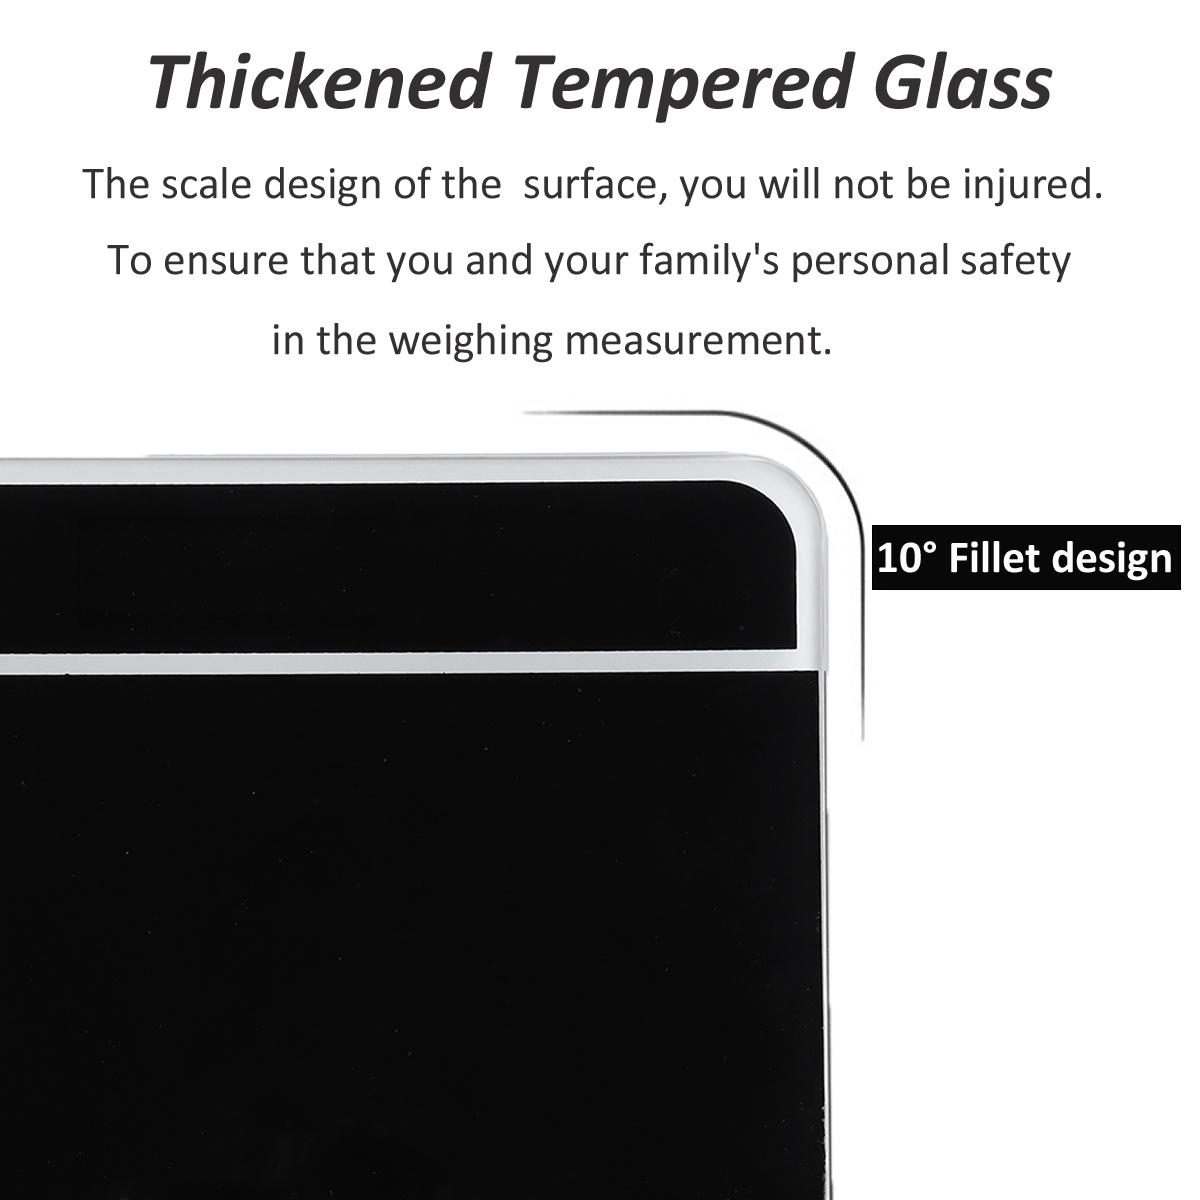 LCD-Electronic-Digital-Tempered-Glass-180kg-Body-Weight-Scale-1238221-5